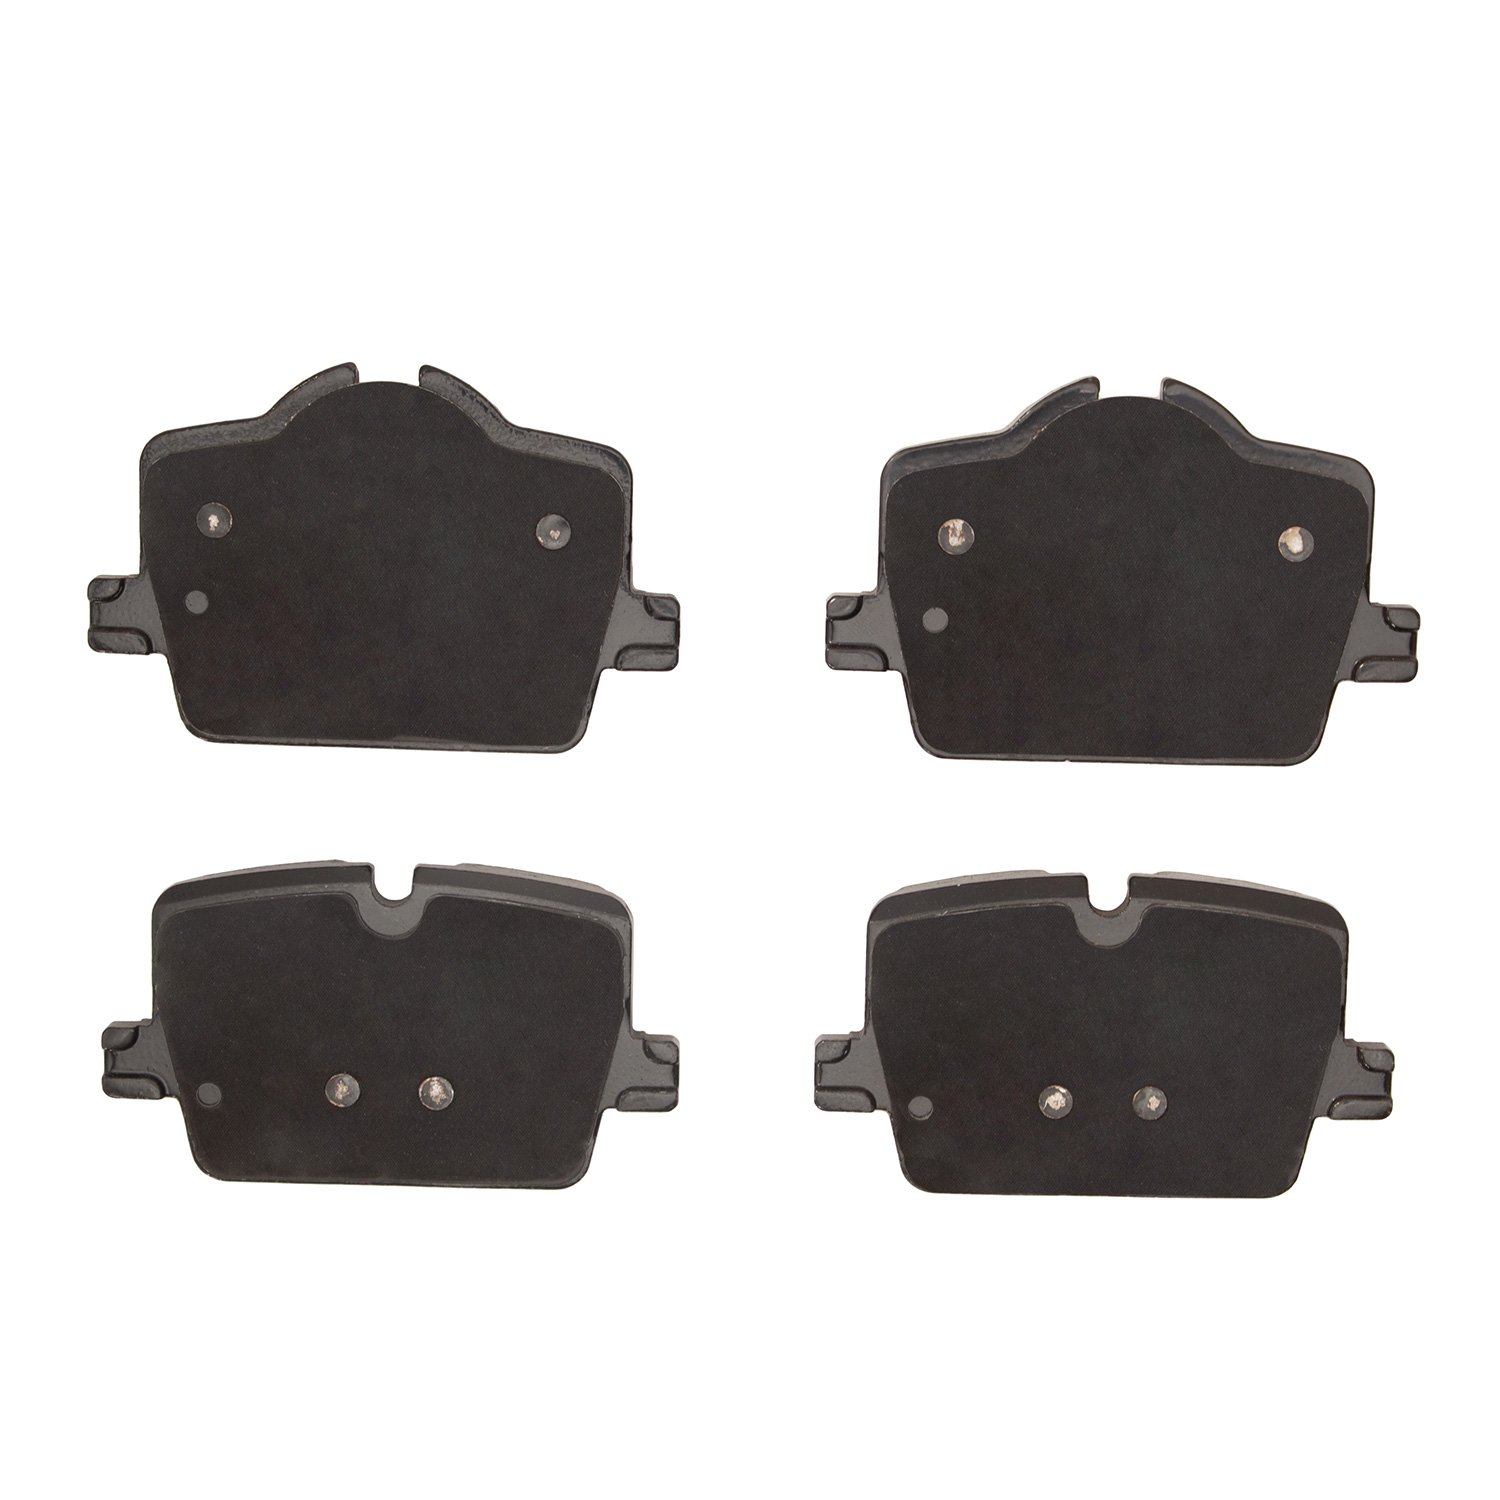 1552-2221-00 5000 Advanced Low-Metallic Brake Pads, Fits Select Multiple Makes/Models, Position: Rear